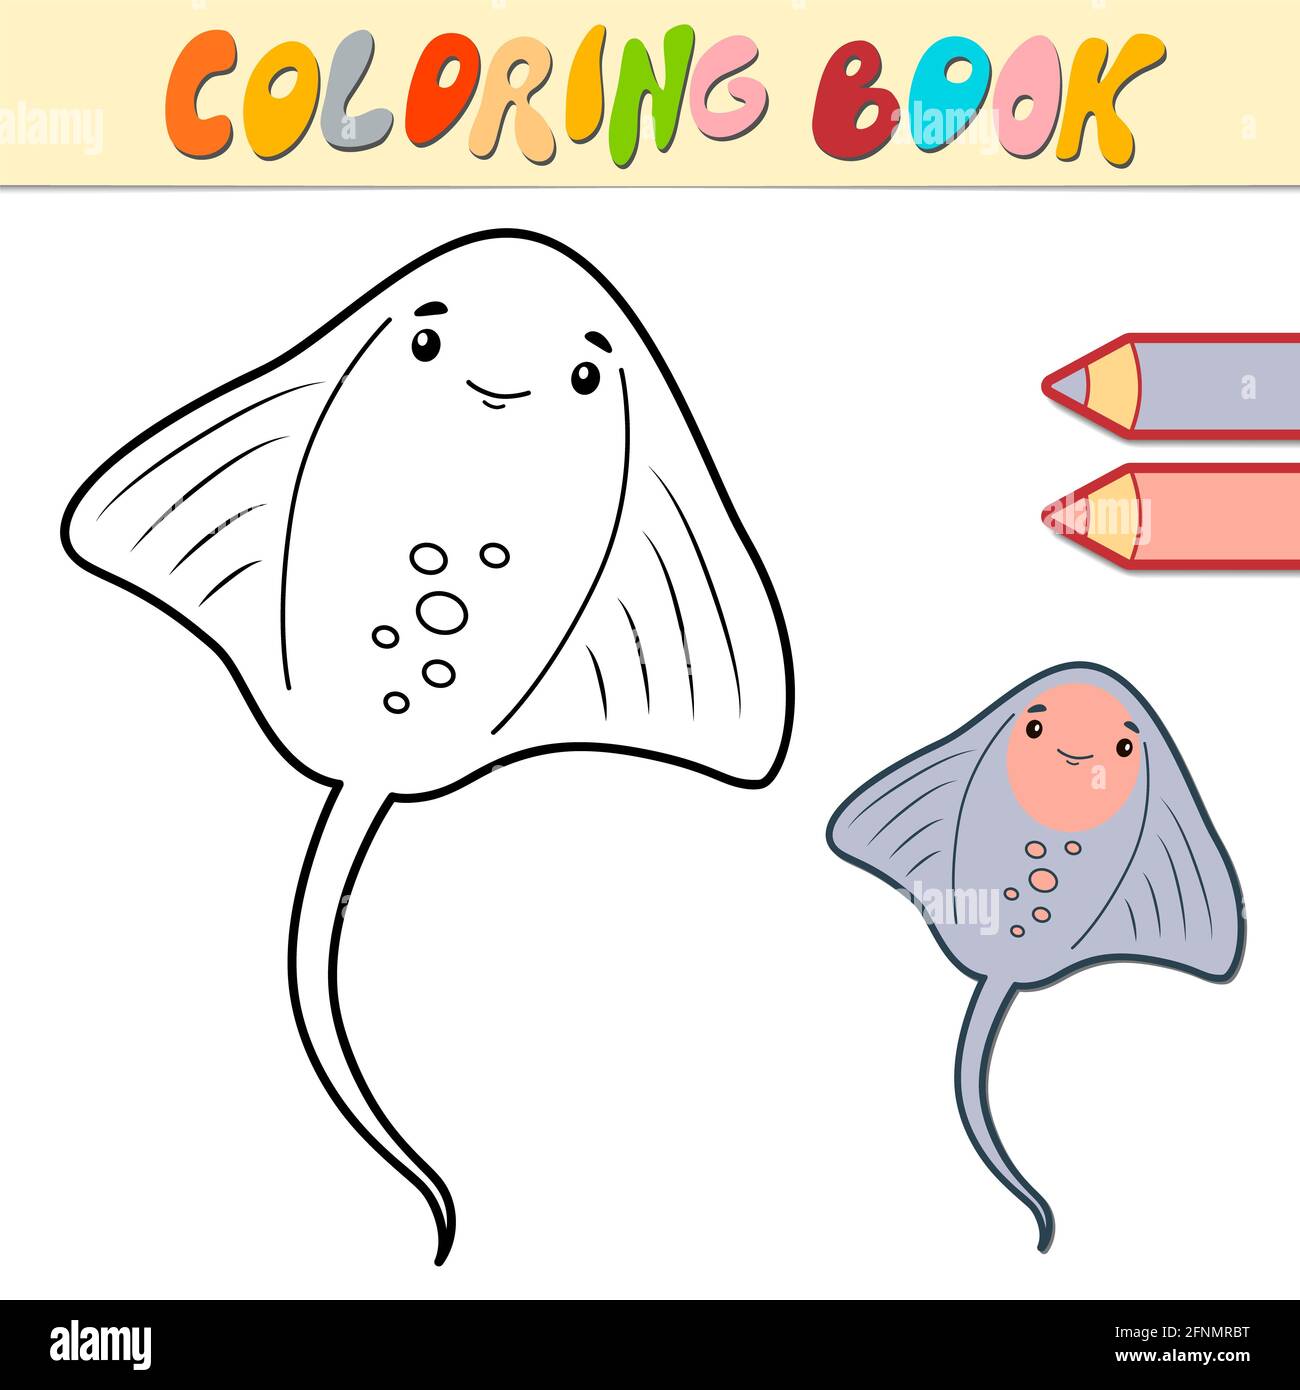 Coloring book or page for kids. cramp-fish black and white  illustration Stock Photo